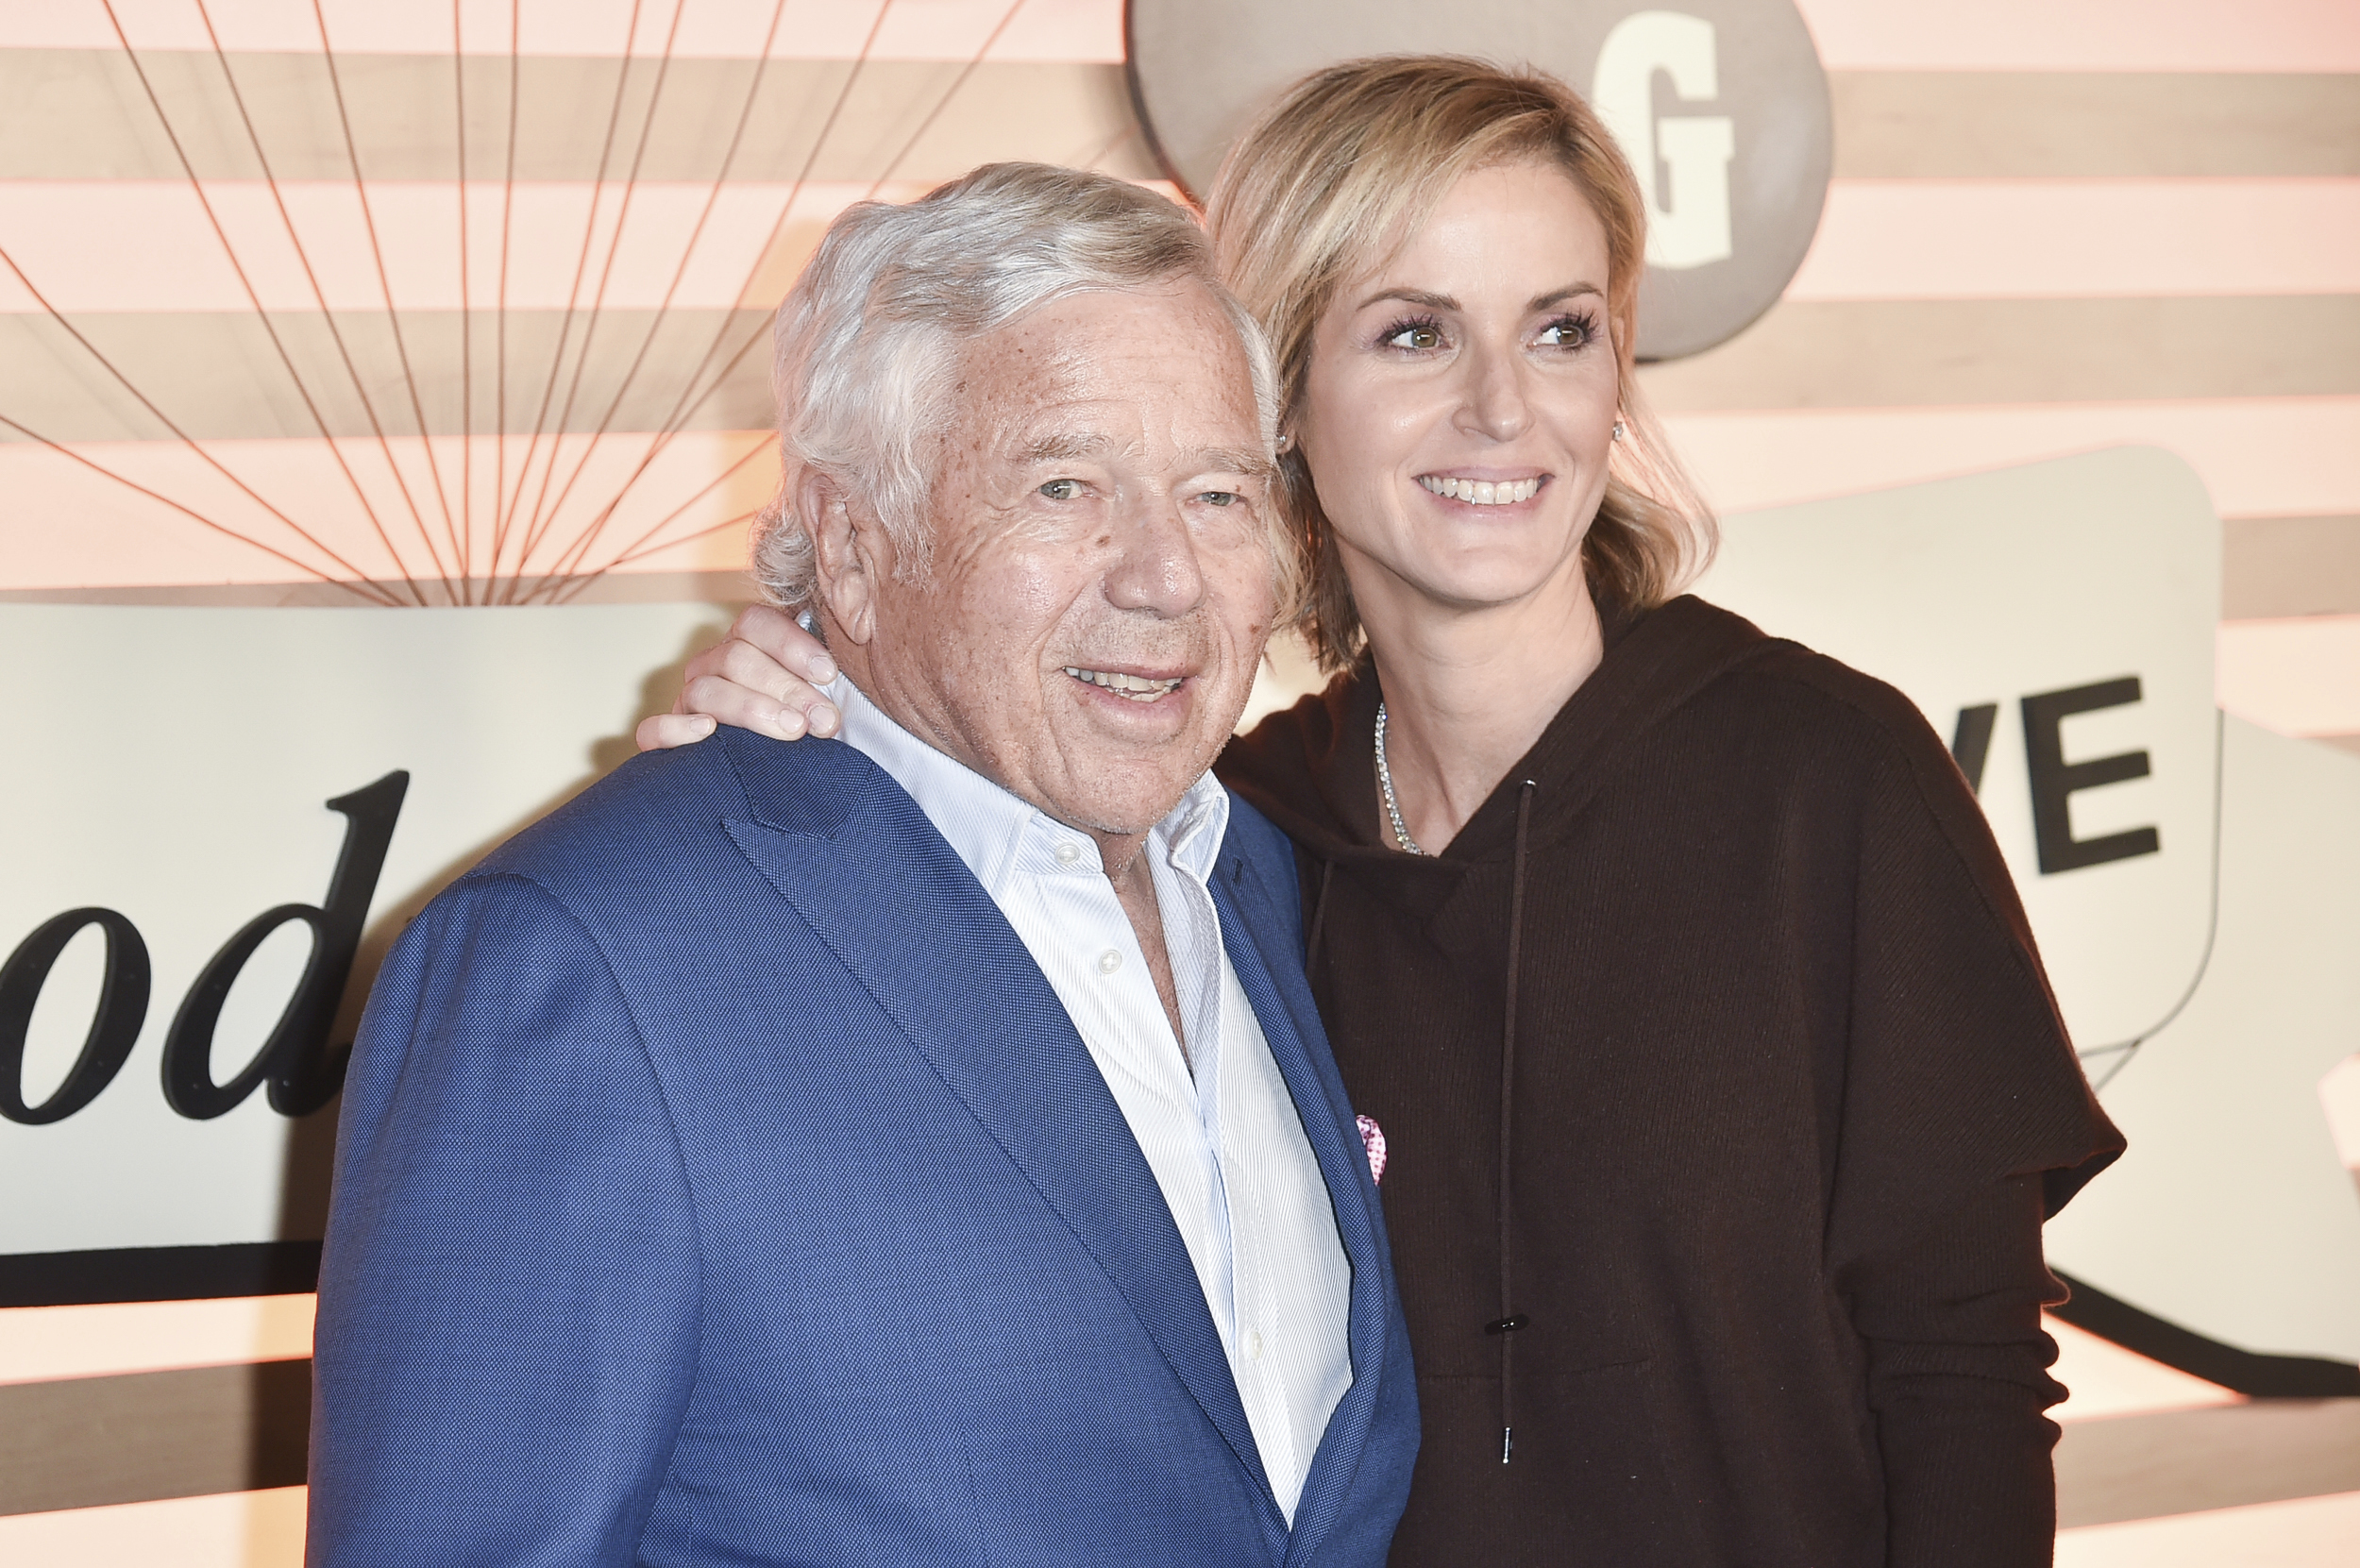 Patriots owner Robert Kraft, 80, is reportedly engaged to girlfriend, 47